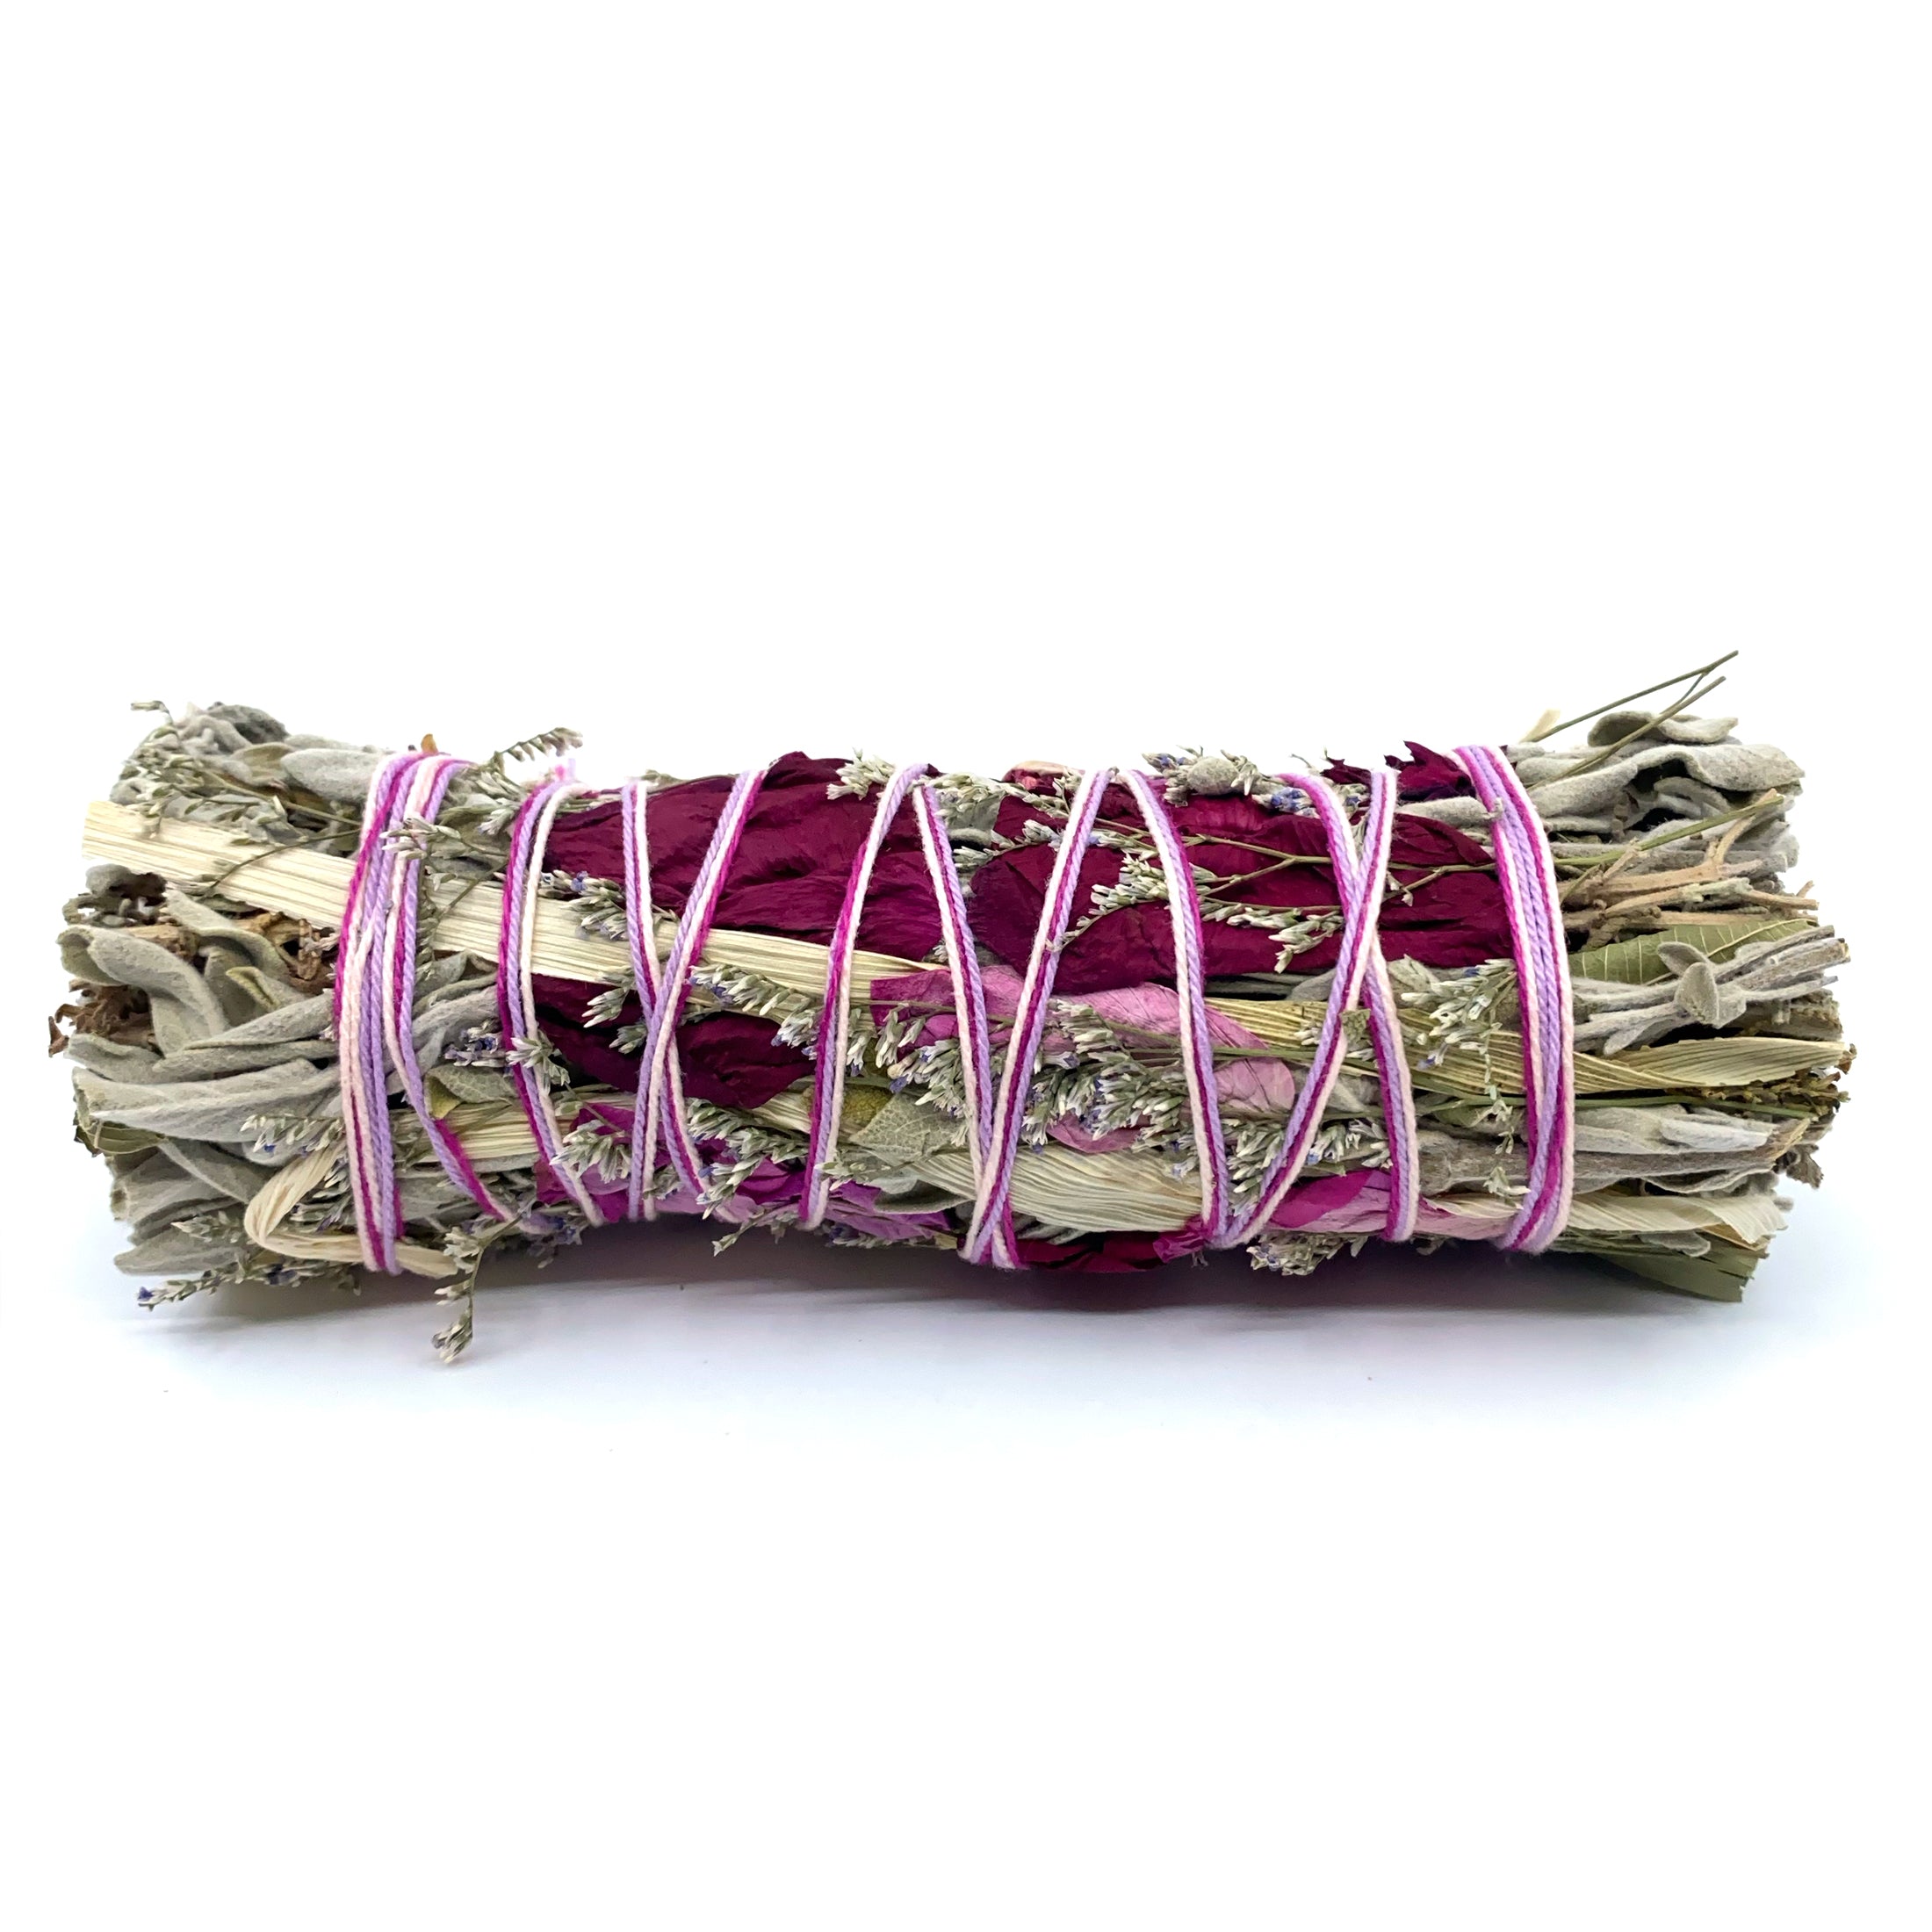 Self Acceptance - With Good Intentions Smudge Stick